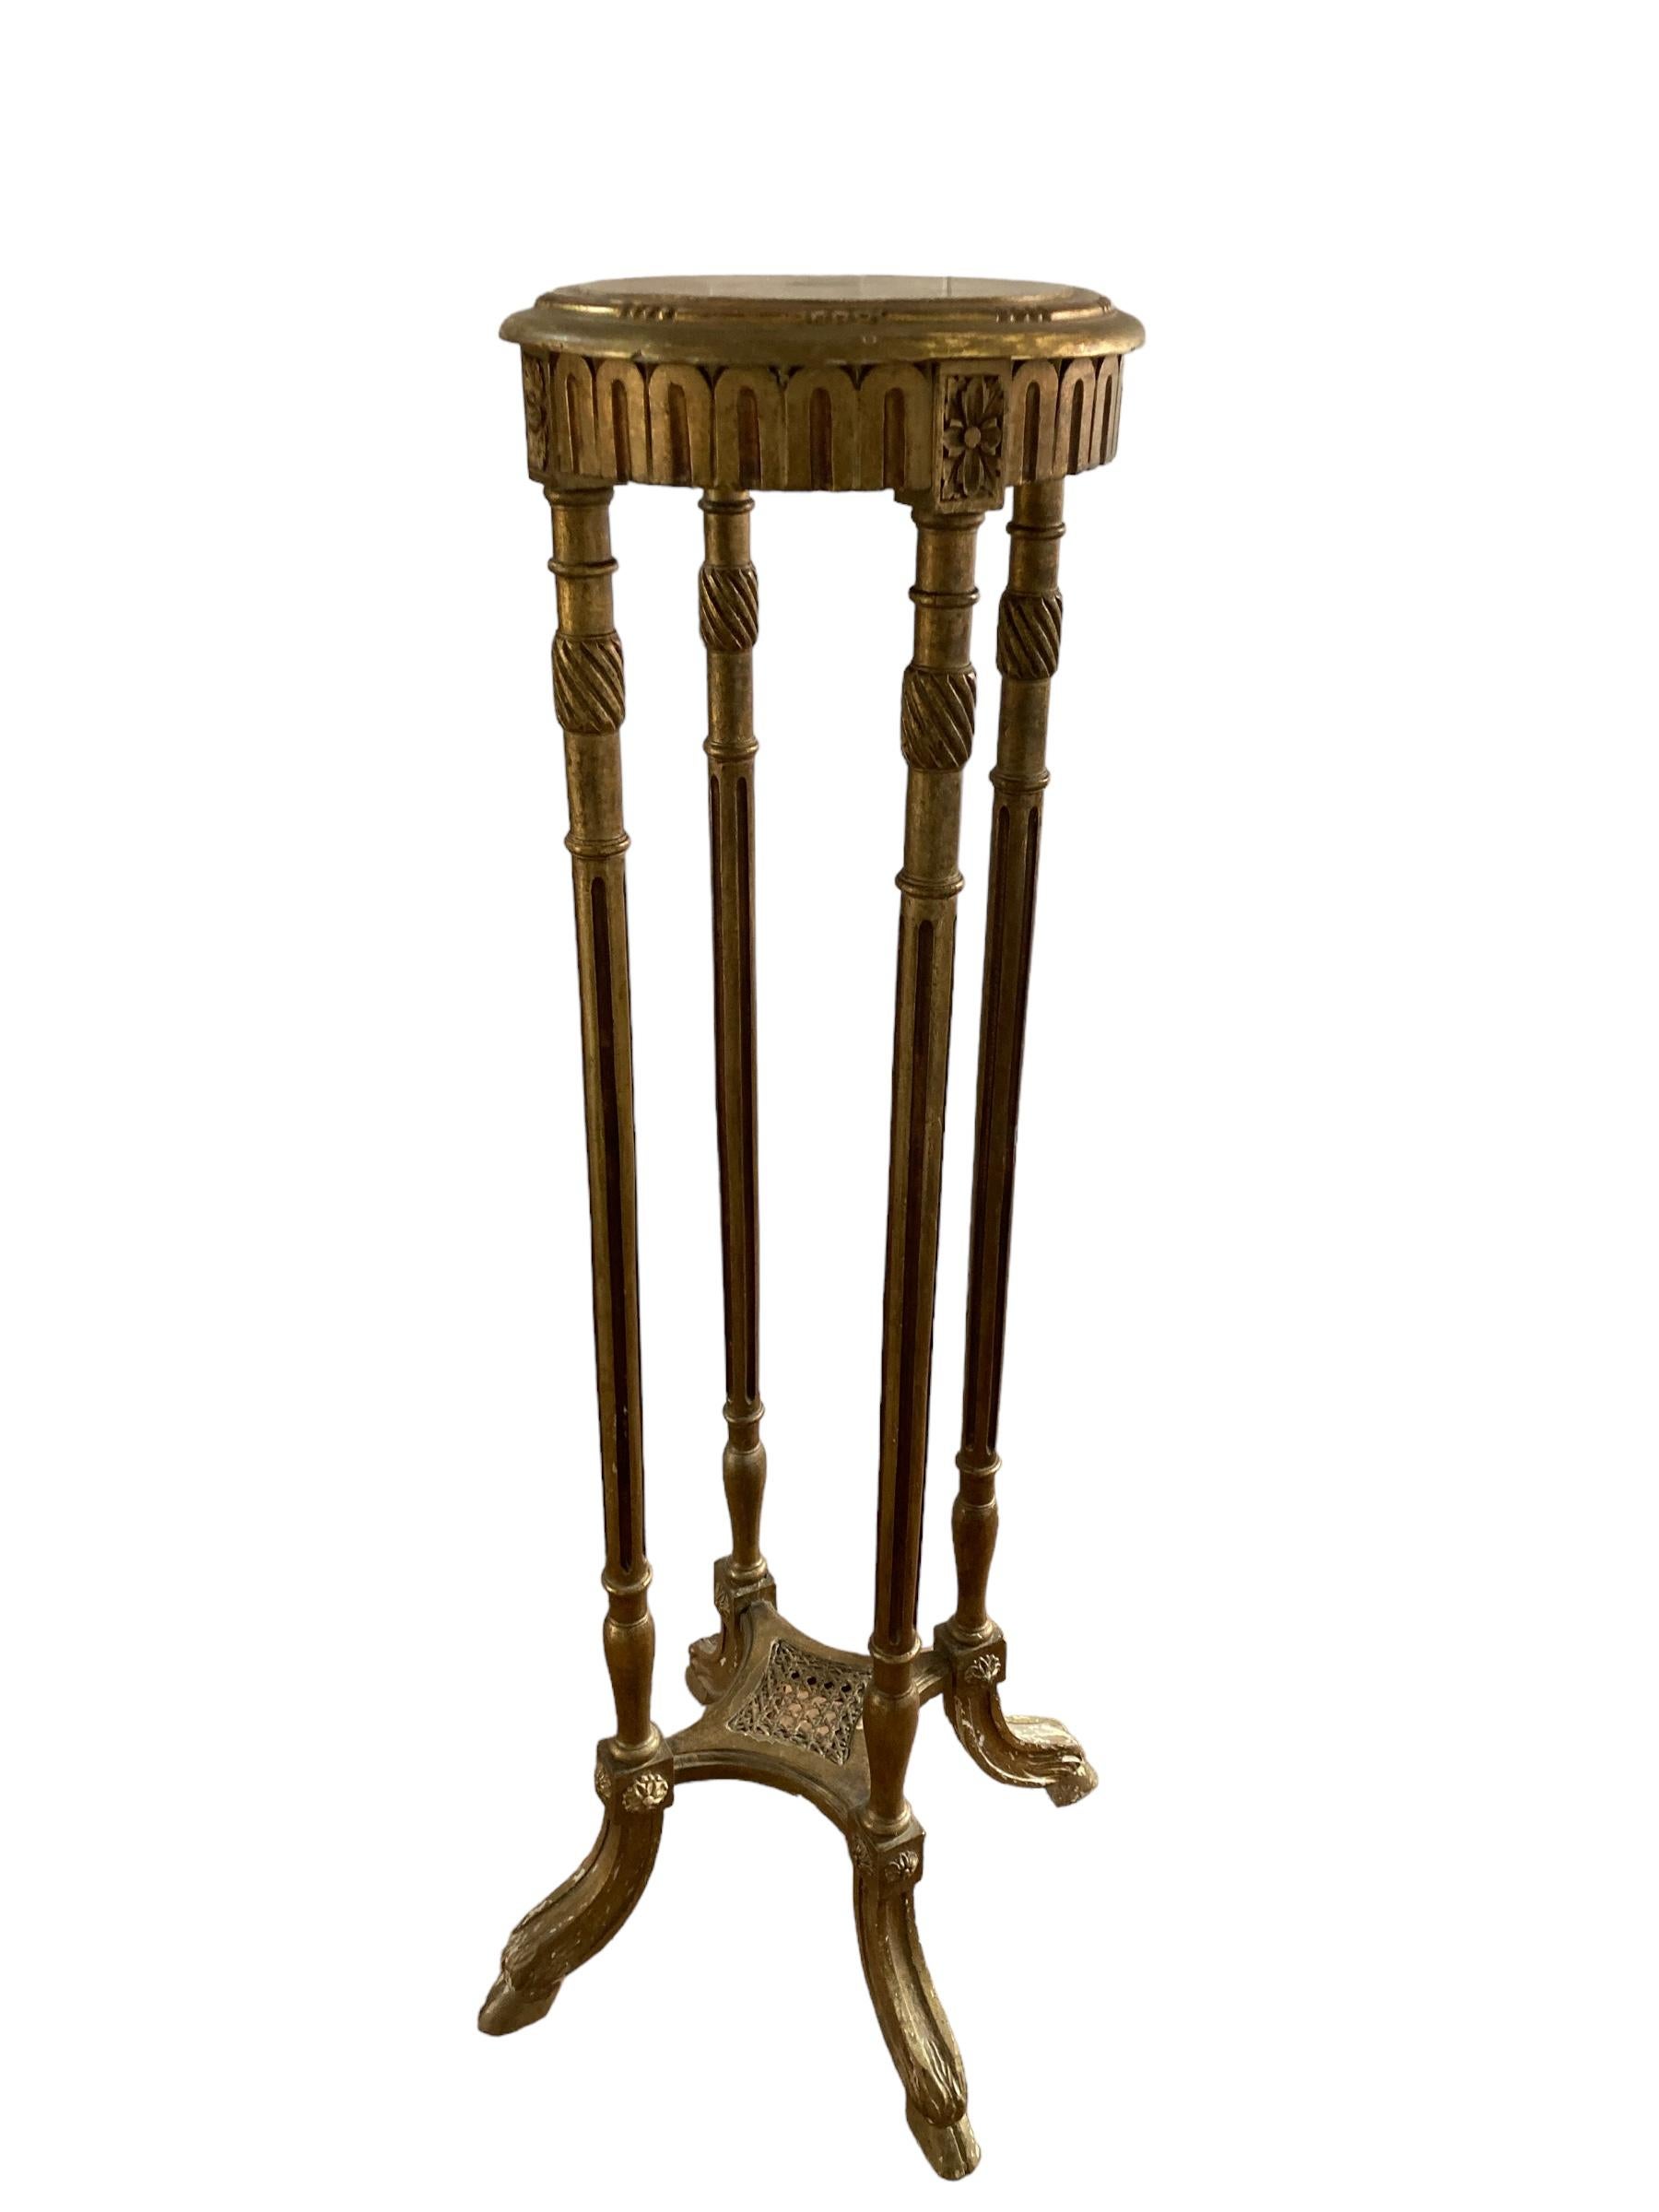 French Louis XIV Style giltwood marble top pedestal with decorative details. Late 19th Century, CIRCA 1890. Sourced from Dijon, France. This beautiful gilded Pedestal standing on curved ornate legs serves as a plant stand or pedestal,
H: 110 cm
W: